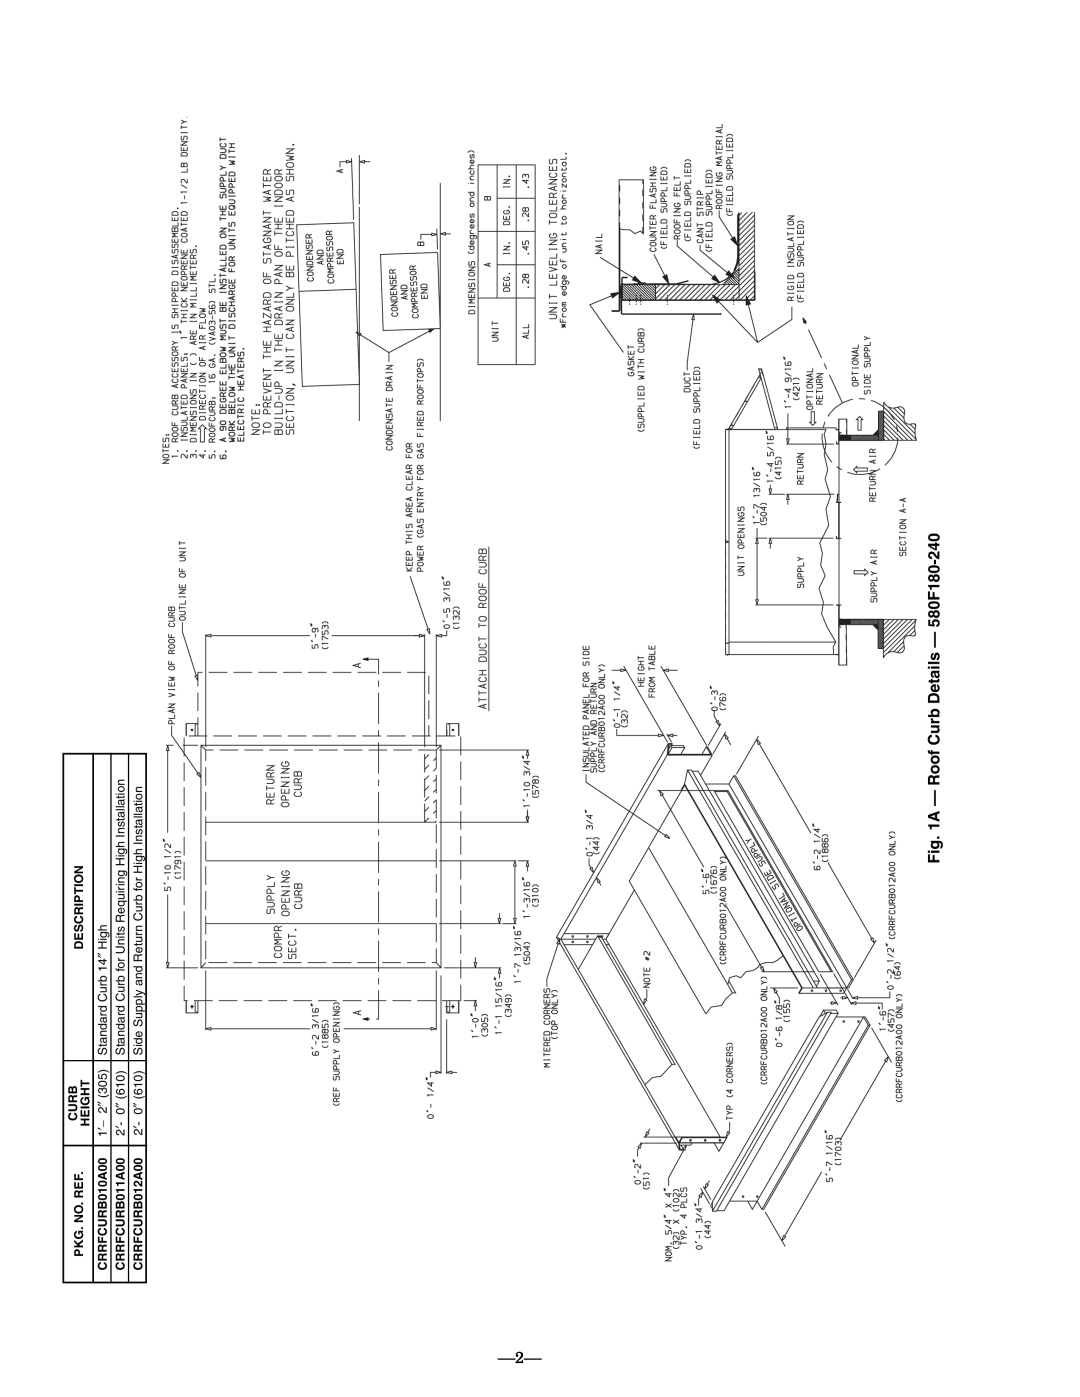 Bryant operation manual A - Roof Curb Details - 580F180-240 